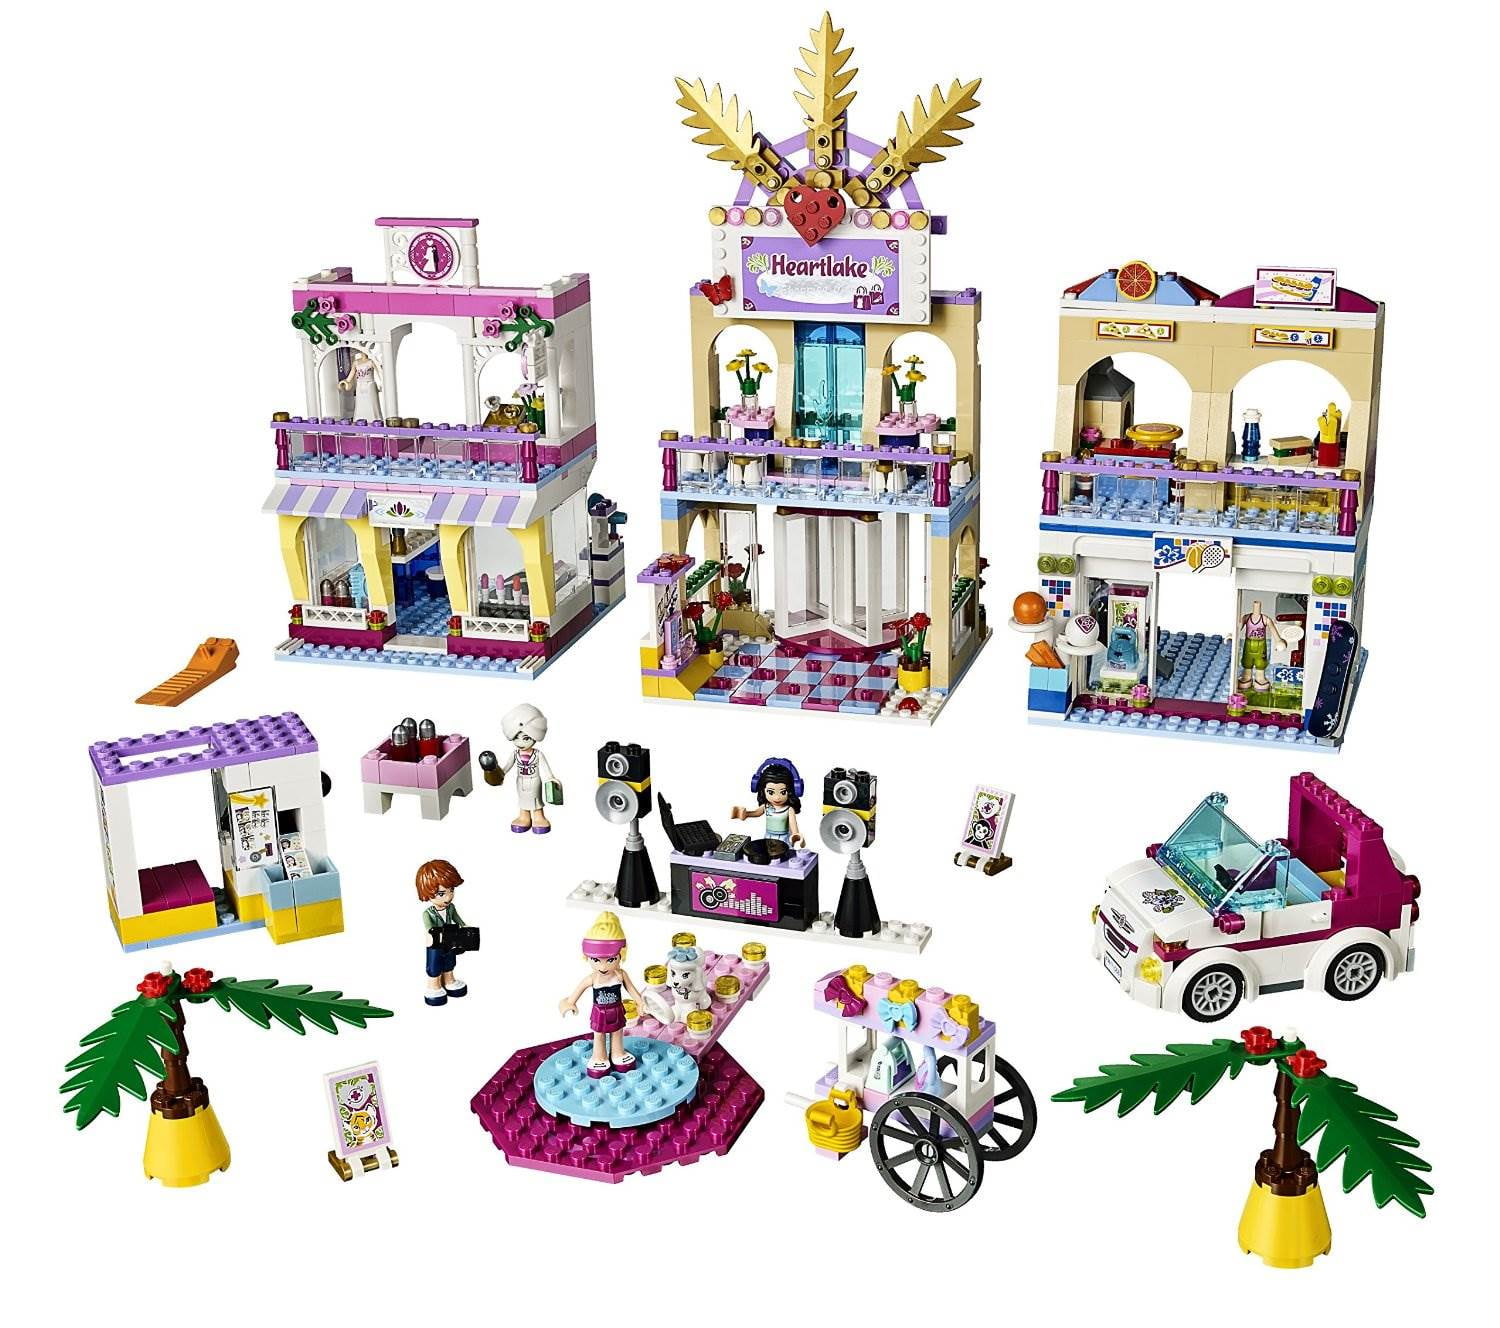 NEW LEGO FRIENDS SHOPPING MALL EMMA FIGURE FAST BEST PRICE FREE GIFT 